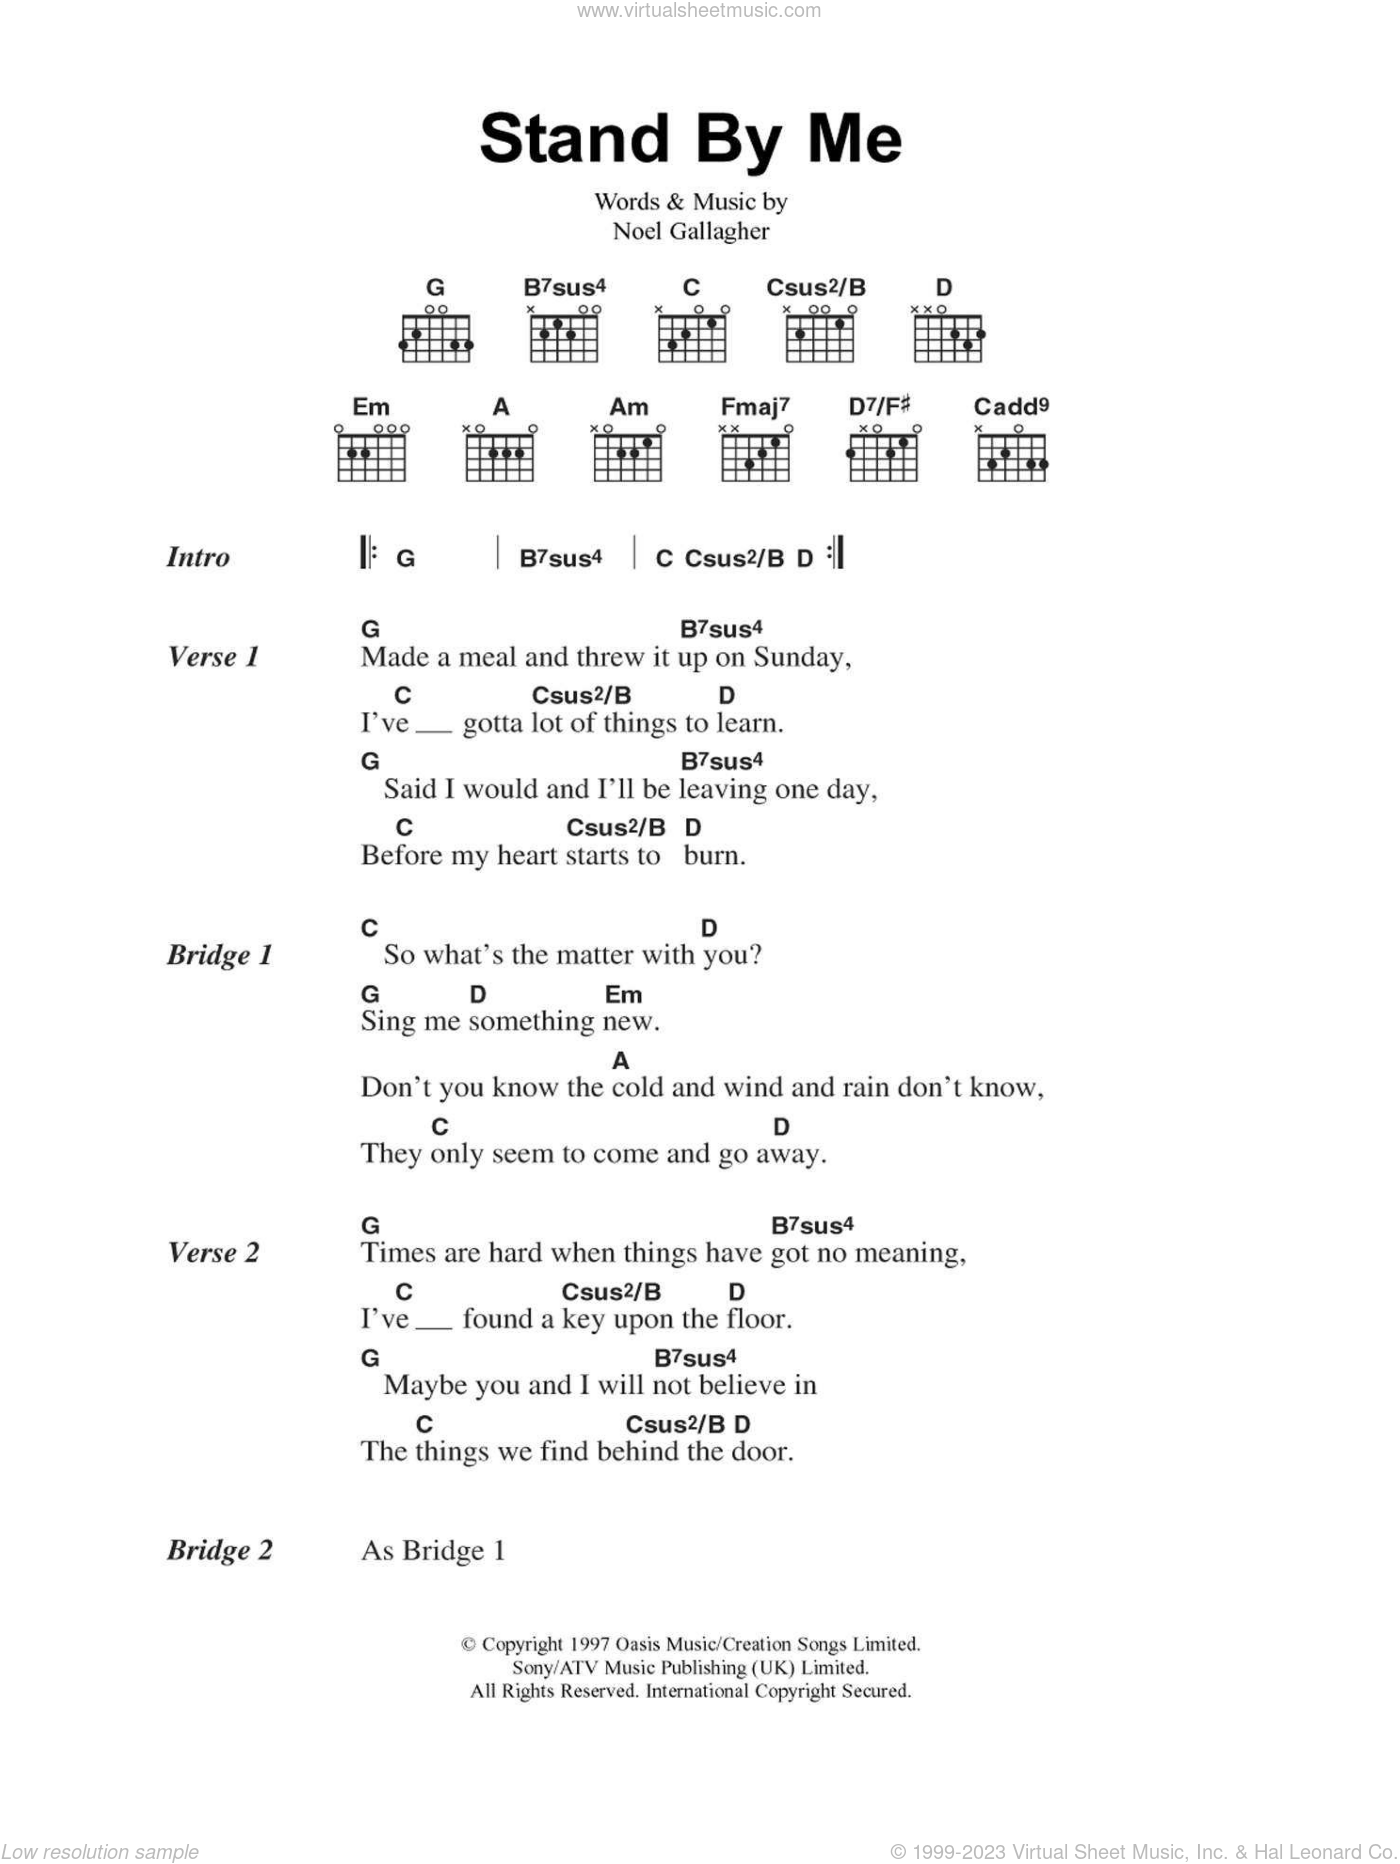 Oasis Stand By Me Sheet Music For Guitar Chords V2